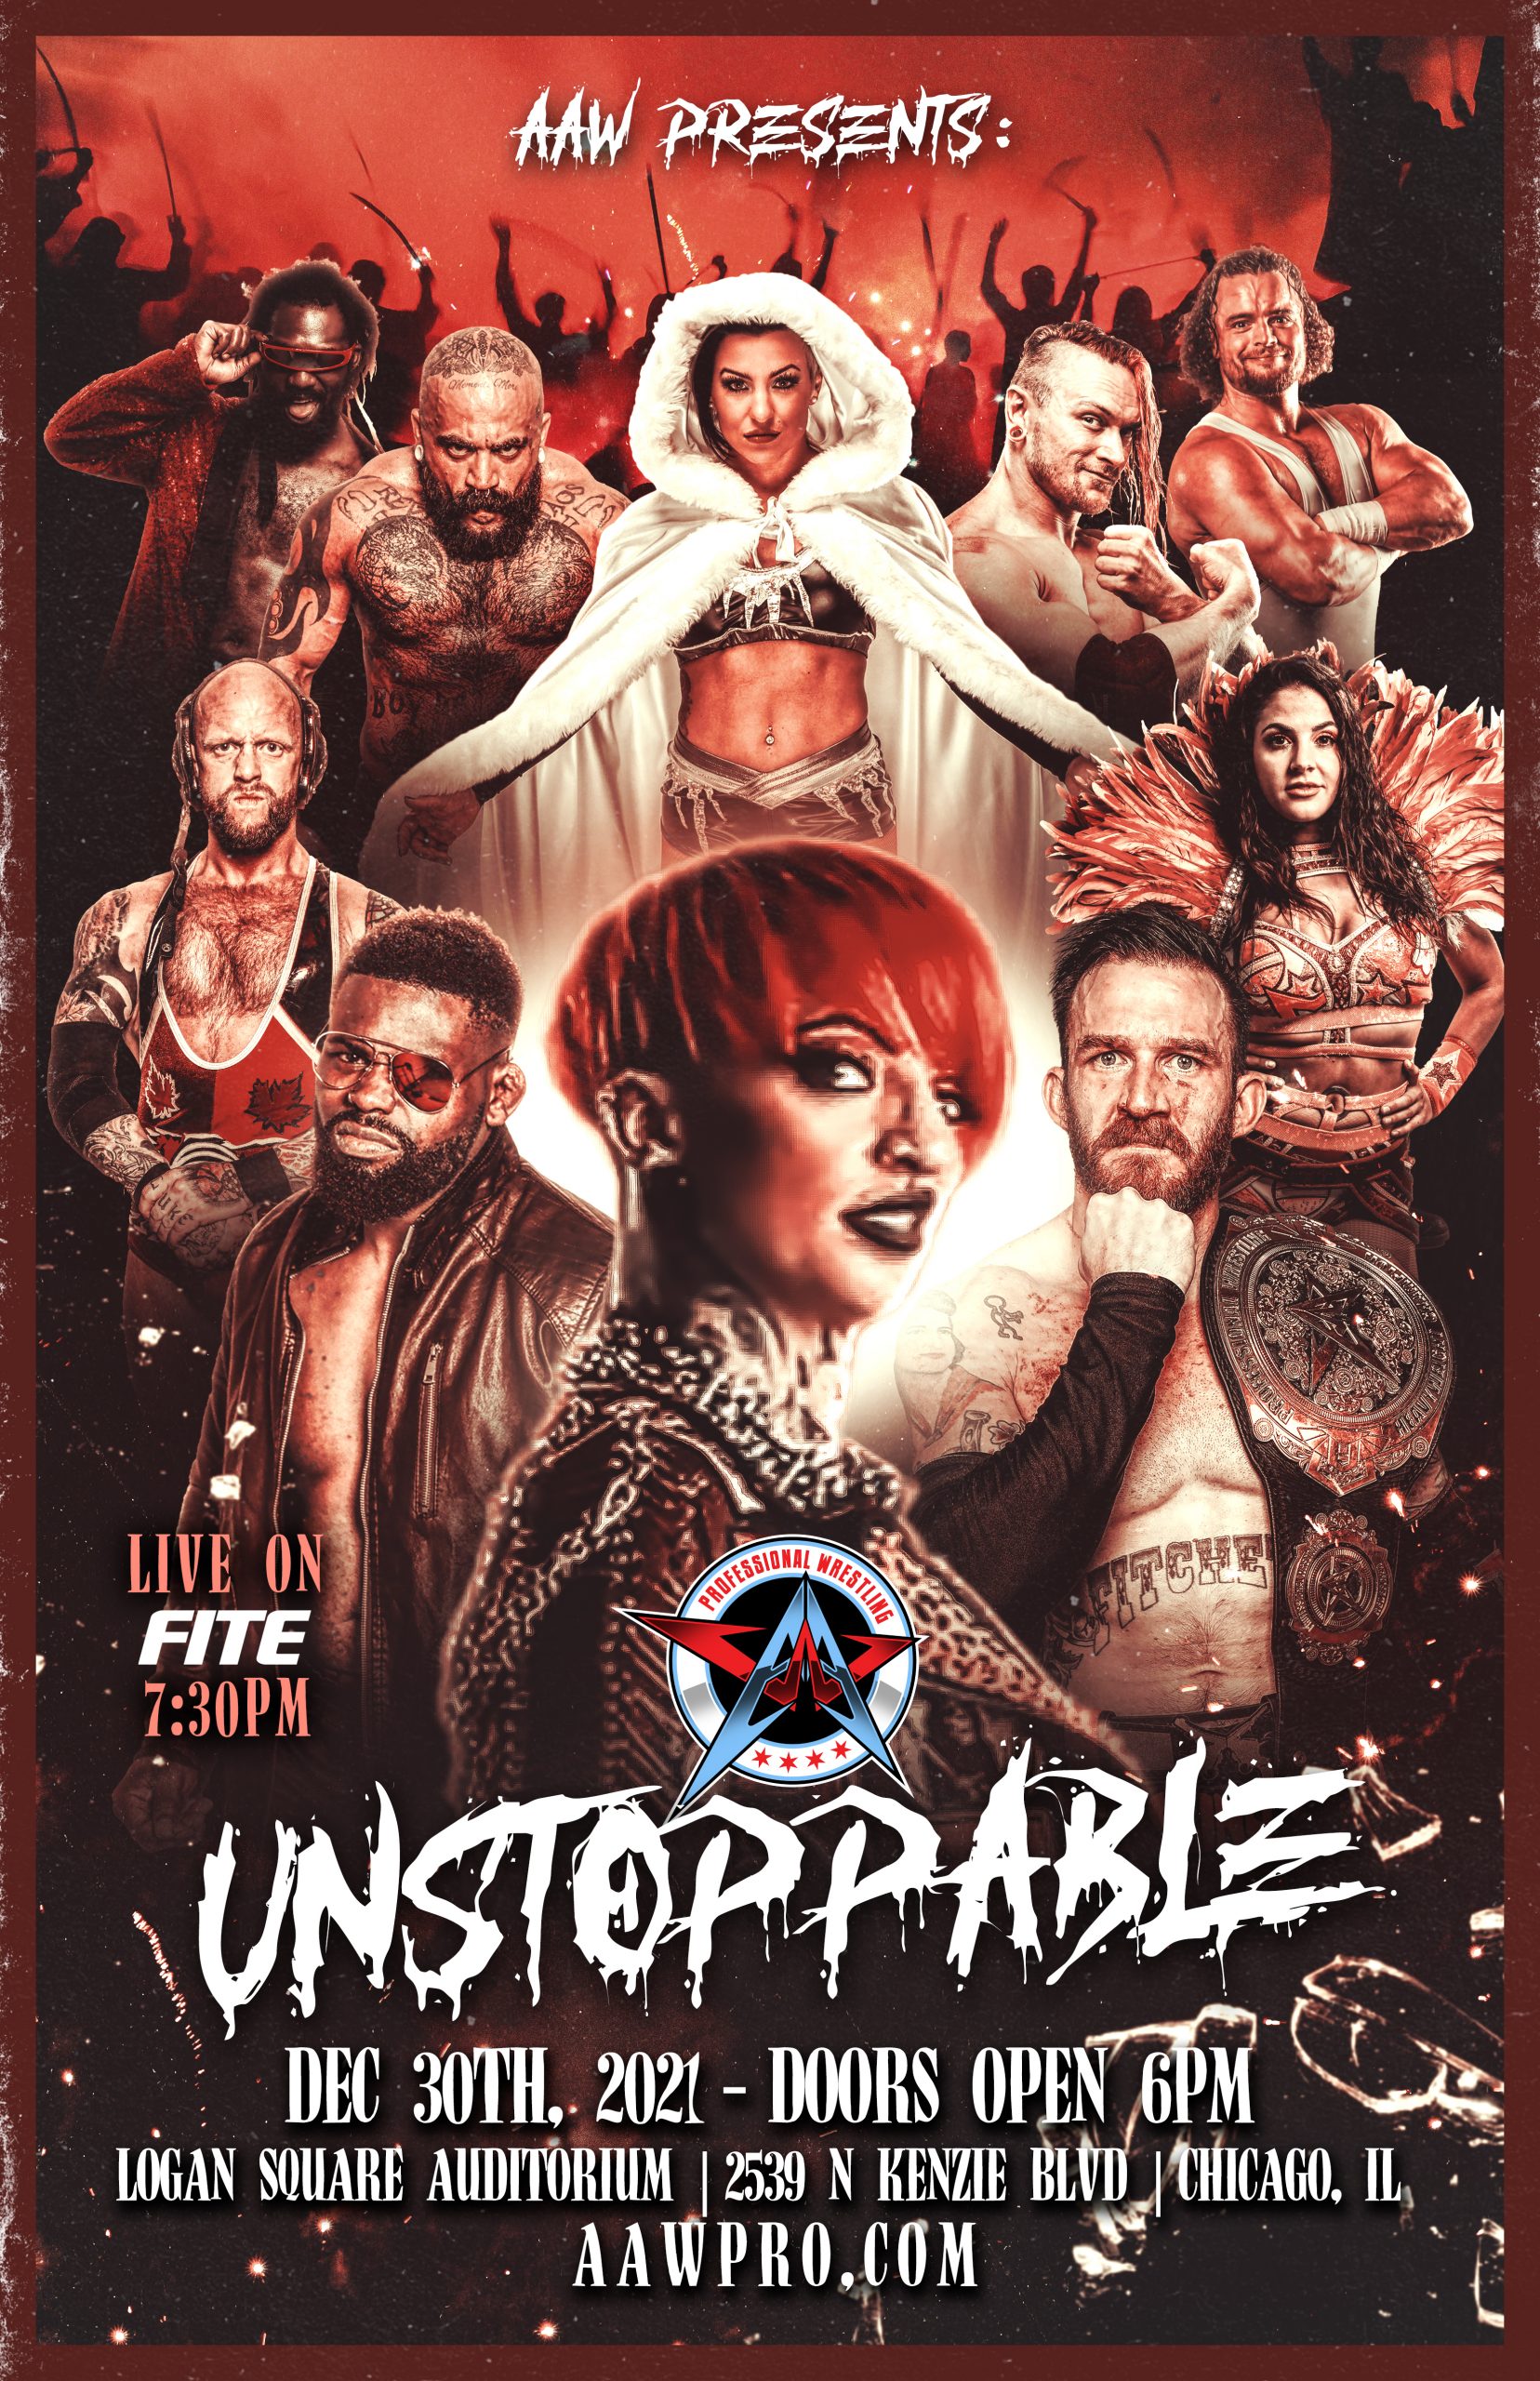 Unstoppable 2021 Tickets On Sale Now